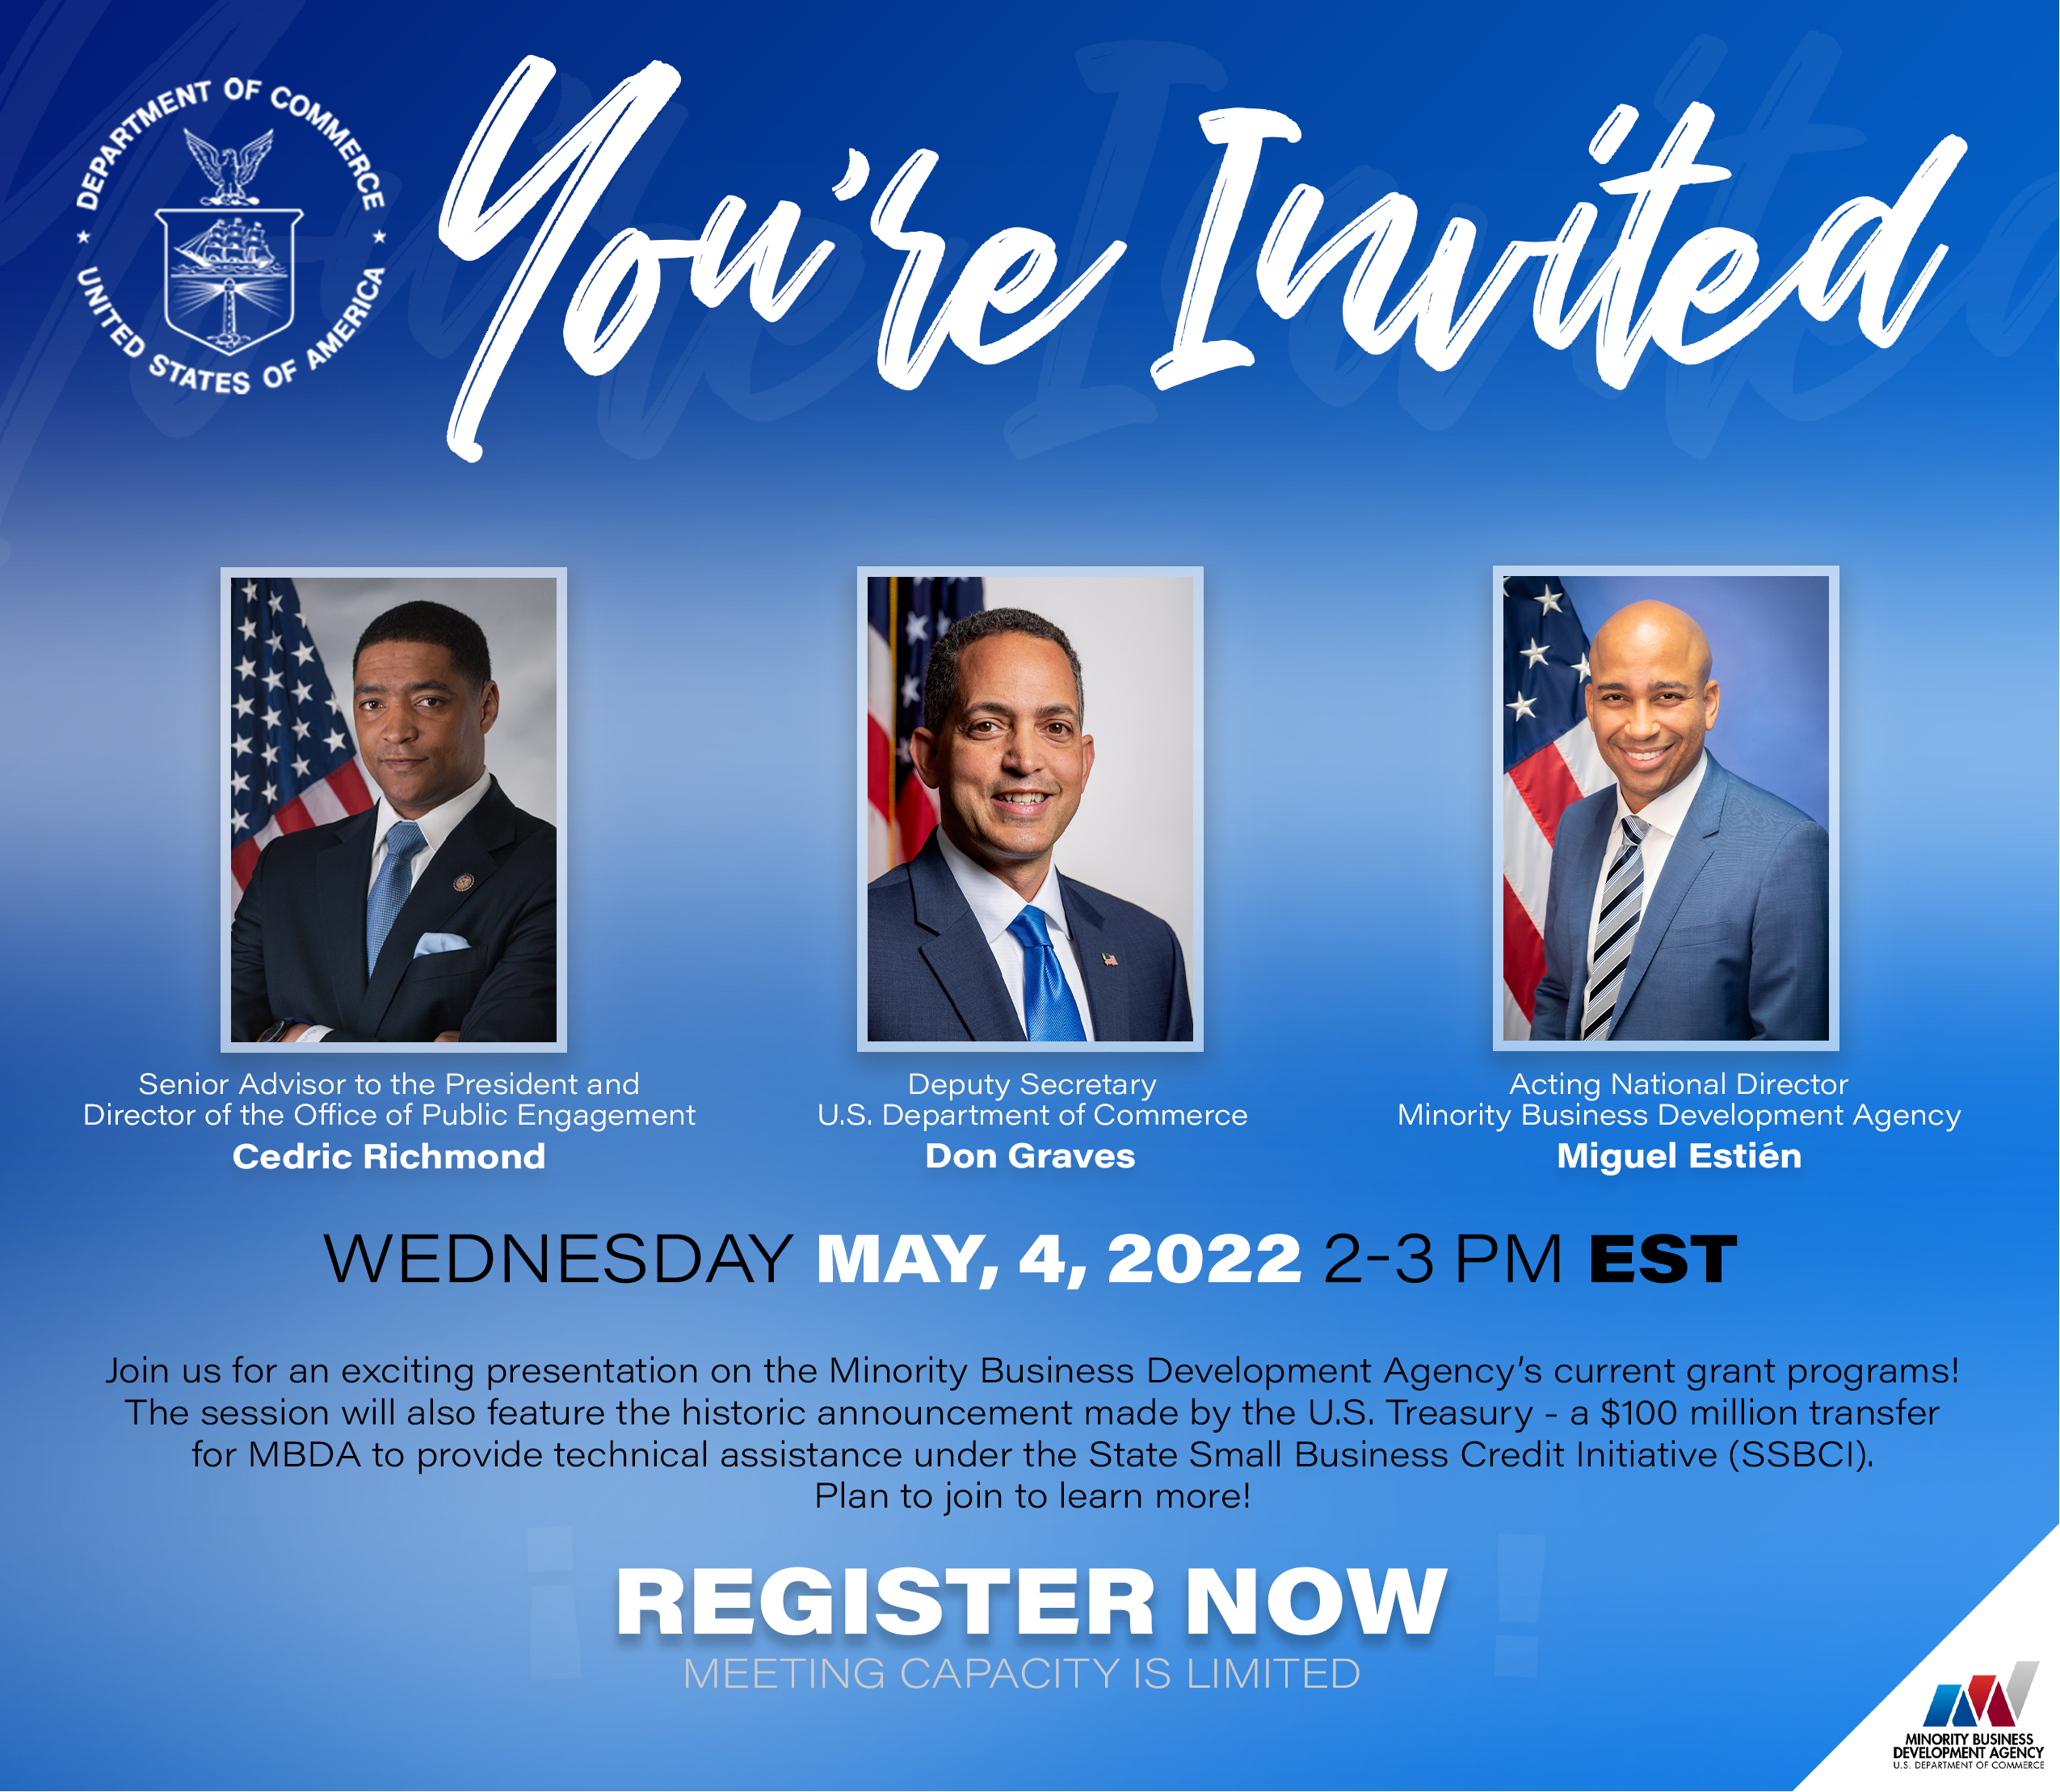 Join us for an exciting conversation as we discuss MBDA’s current grant opportunities and the impact of the State Small Business Credit Initiative on the minority business community. Register Now!  